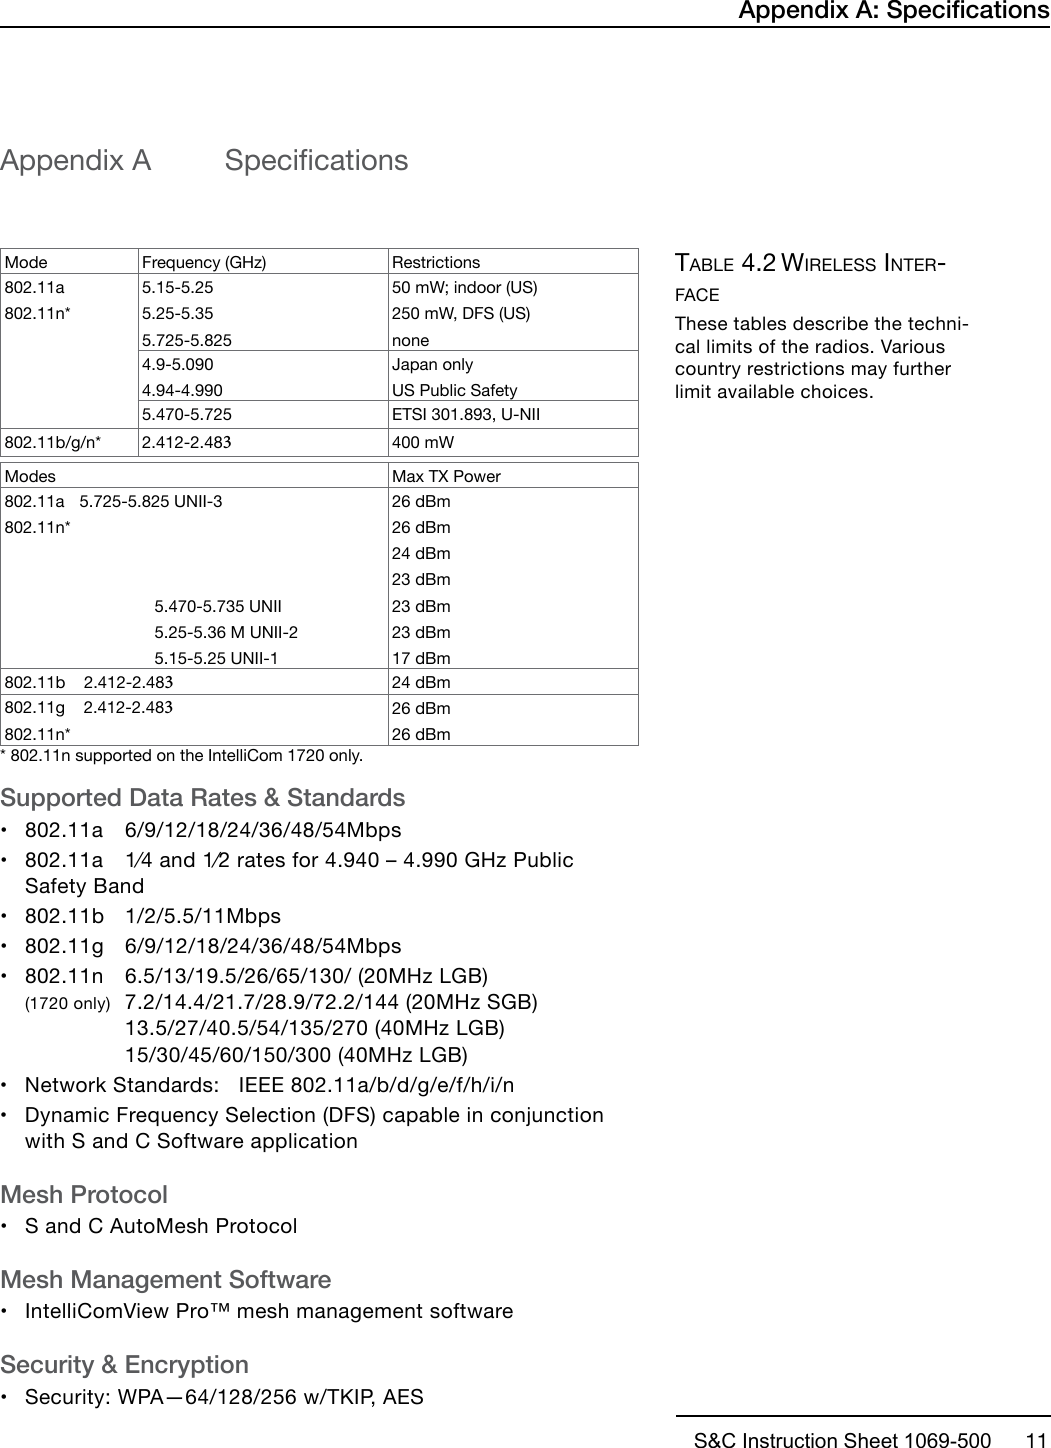 S&amp;C Instruction Sheet 1069-500      11Appendix A  SpecicationsMode Frequency (GHz) Restrictions802.11a802.11n*5.15-5.255.25-5.355.725-5.82550 mW; indoor (US)250 mW, DFS (US)none4.9-5.0904.94-4.990Japan onlyUS Public Safety5.470-5.725 ETSI 301.893, U-NII802.11b/g/n* 2.412-2.483400 mWModes Max TX Power802.11a   5.725-5.825 UNII-3802.11n*5.470-5.735 UNII5.25-5.36 M UNII-25.15-5.25 UNII-126 dBm26 dBm24 dBm23 dBm23 dBm23 dBm17 dBm802.11b    2.412-2.48324 dBm802.11g    2.412-2.483 802.11n*26 dBm26 dBm* 802.11n supported on the IntelliCom 1720 only.Supported Data Rates &amp; Standards•802.11a 6/9/12/18/24/36/48/54Mbps•802.11a  1⁄4 and 1⁄2 rates for 4.940 – 4.990 GHz PublicSafety Band•802.11b 1/2/5.5/11Mbps•802.11g 6/9/12/18/24/36/48/54Mbps•802.11n  6.5/13/19.5/26/65/130/ (20MHz LGB)(1720 only)  7.2/14.4/21.7/28.9/72.2/144 (20MHz SGB)13.5/27/40.5/54/135/270 (40MHz LGB) 15/30/45/60/150/300 (40MHz LGB)•Network Standards:   IEEE 802.11a/b/d/g/e/f/h/i/n•Dynamic Frequency Selection (DFS) capable in conjunctionwith S and C Software applicationMesh Protocol•S and C AutoMesh ProtocolMesh Management Software•IntelliComView Pro™ mesh management softwareSecurity &amp; Encryption•Security: WPA—64/128/256 w/TKIP, AESTable 4.2 Wireless inTer-FaceThese tables describe the techni-cal limits of the radios. Various country restrictions may further limit available choices.Appendix A: Specications